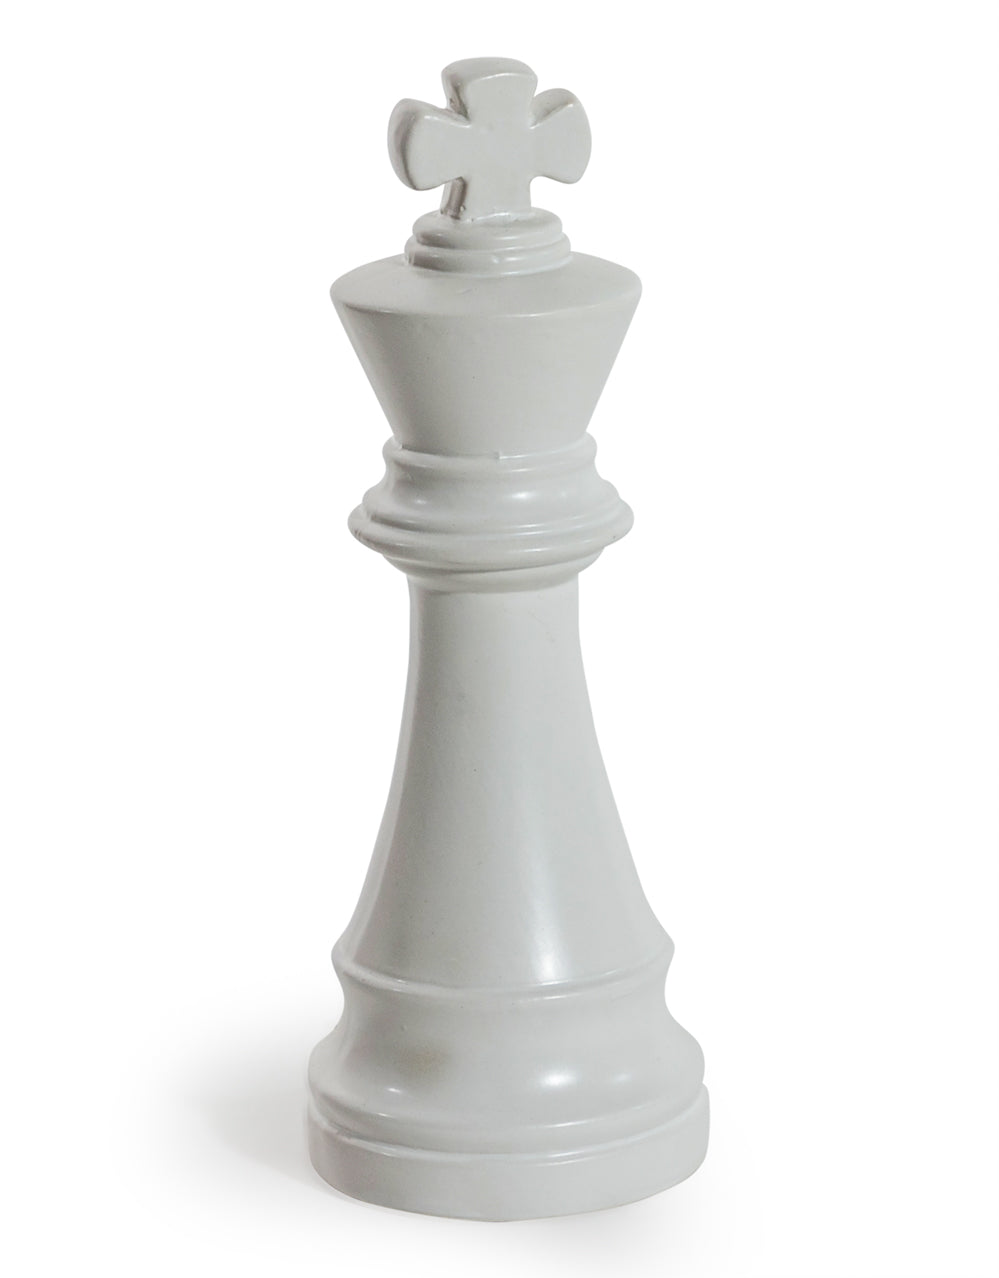 King Chess Piece Ornament